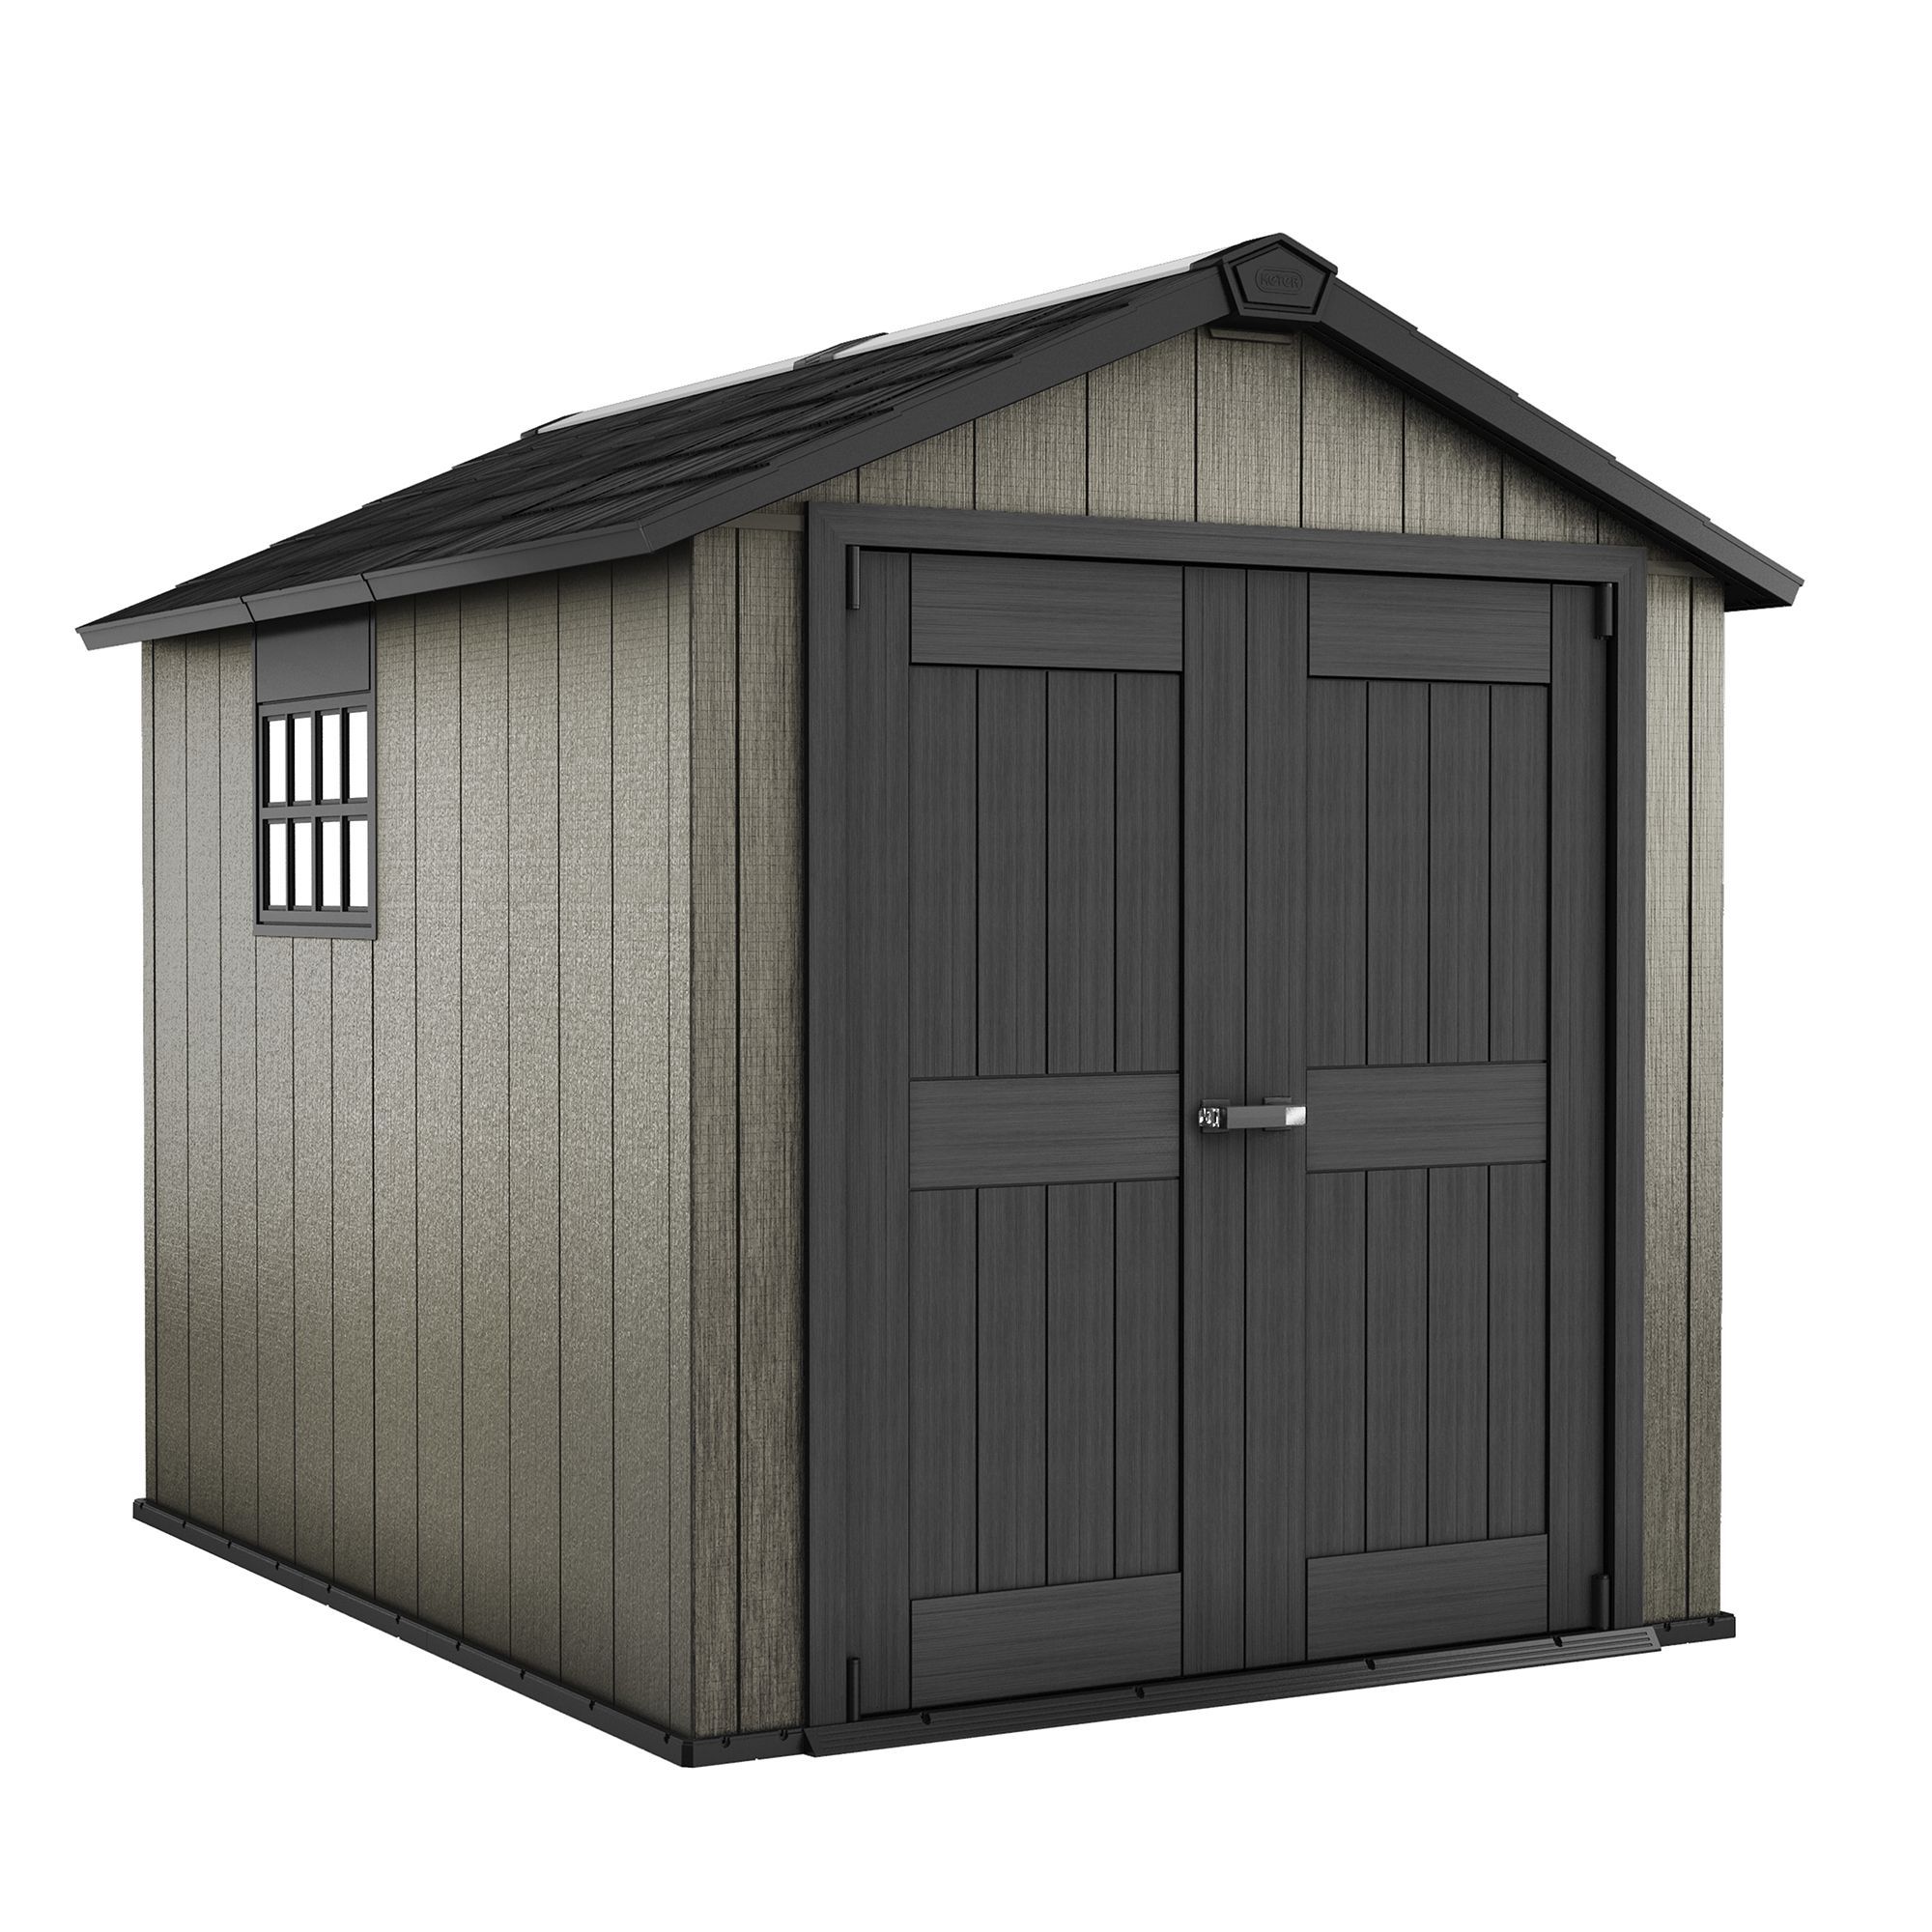 Keter Oakland 9x7.5 Apex Plastic Shed Departments 